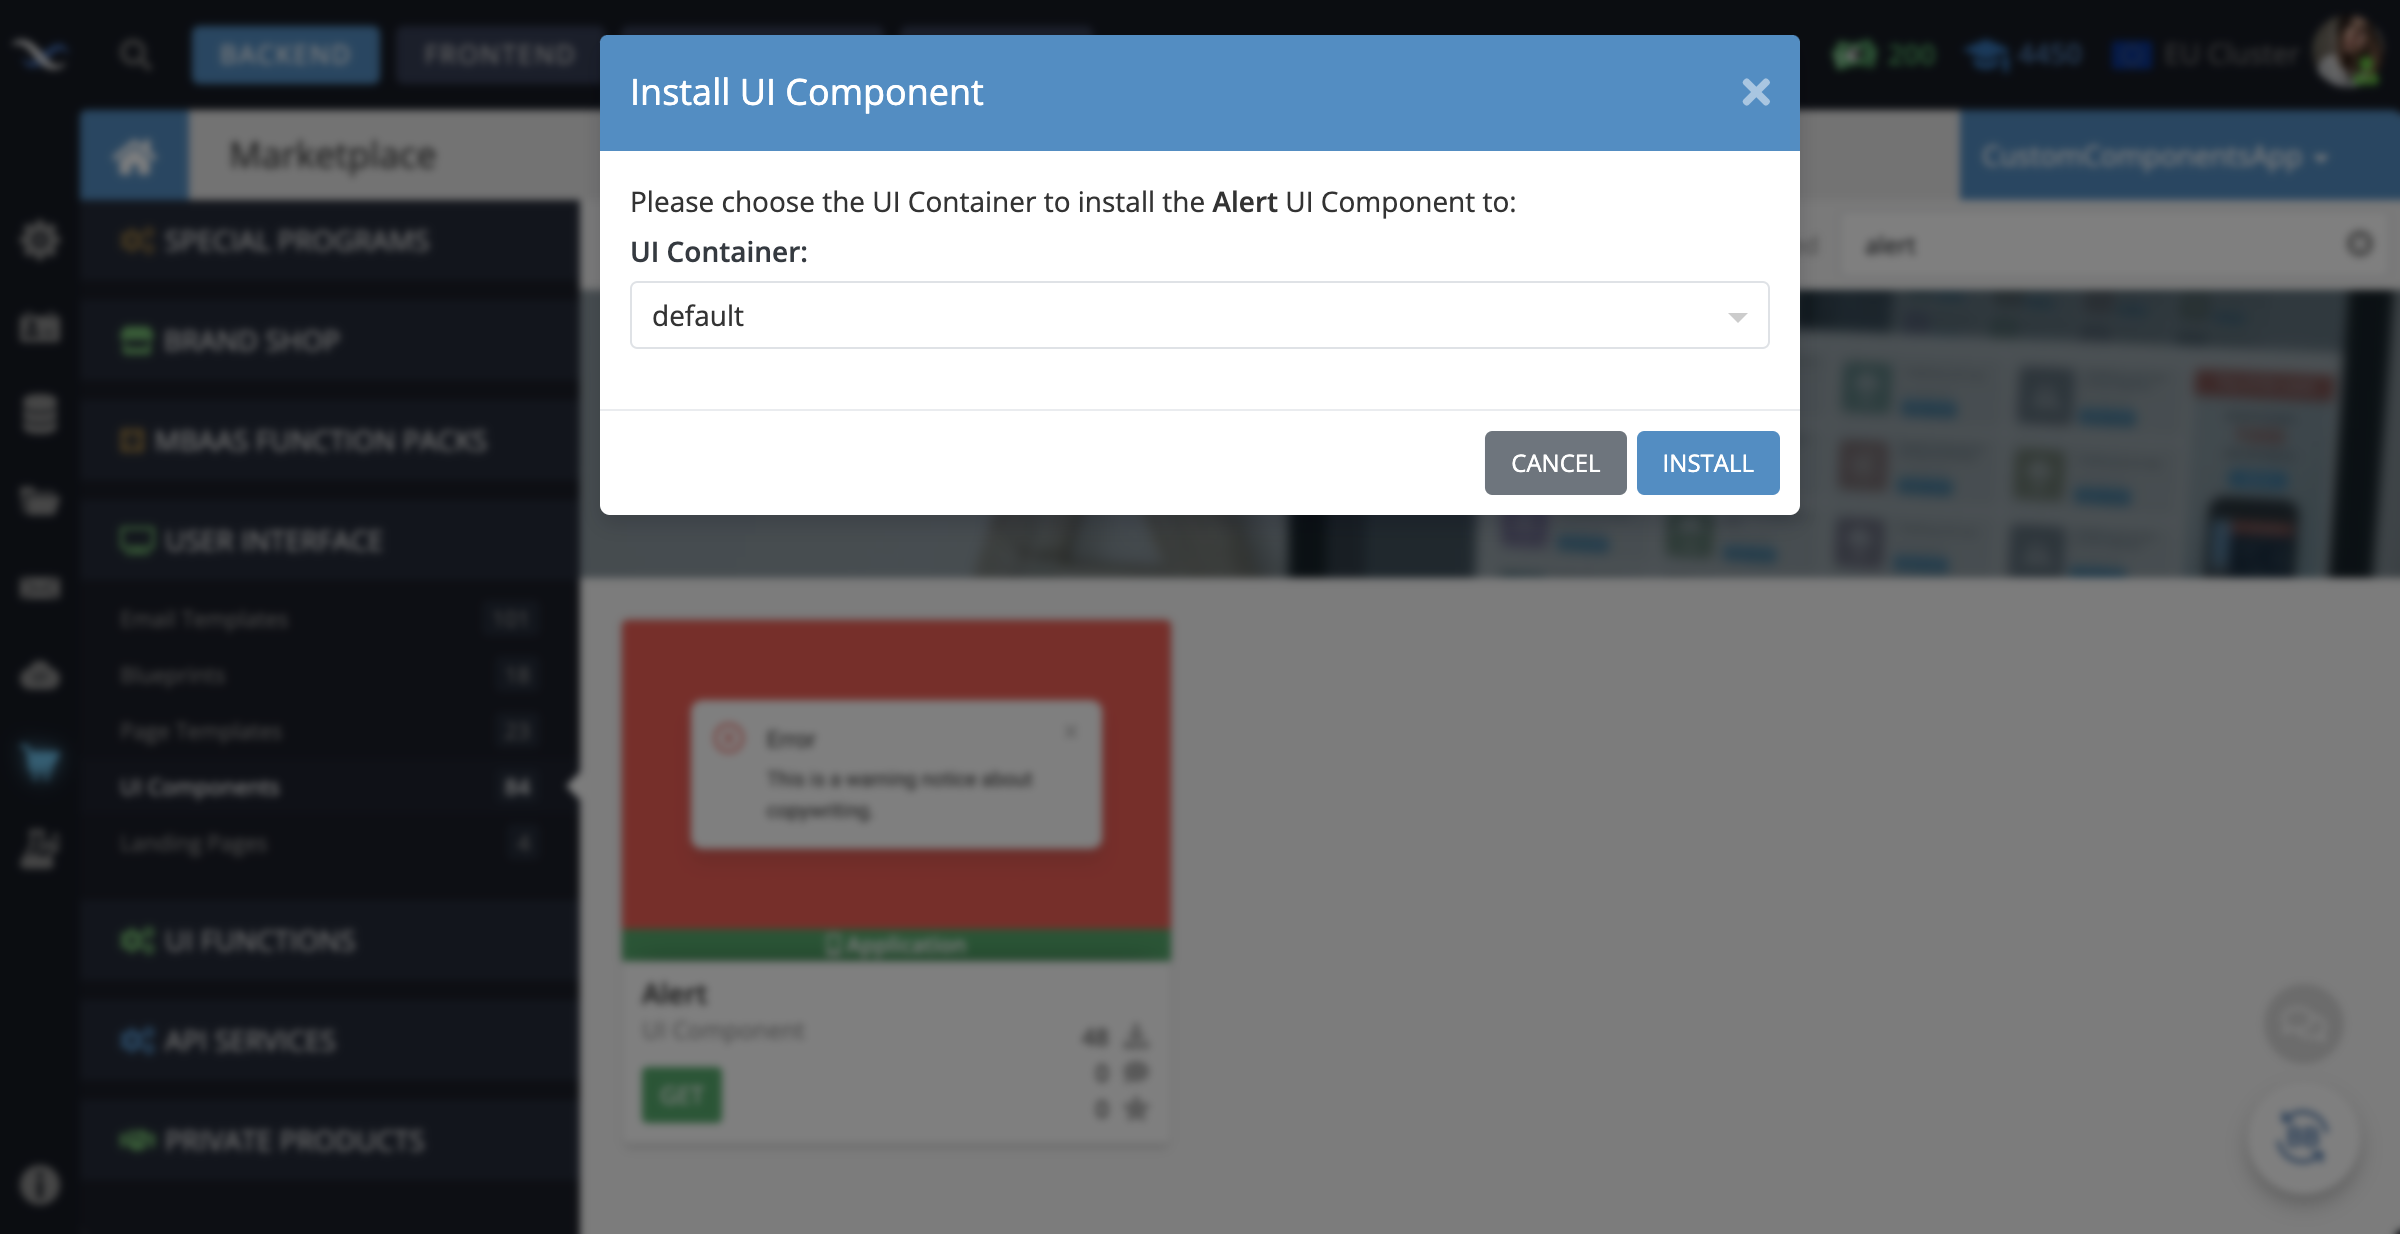 Install the component to the UI Container of your choice